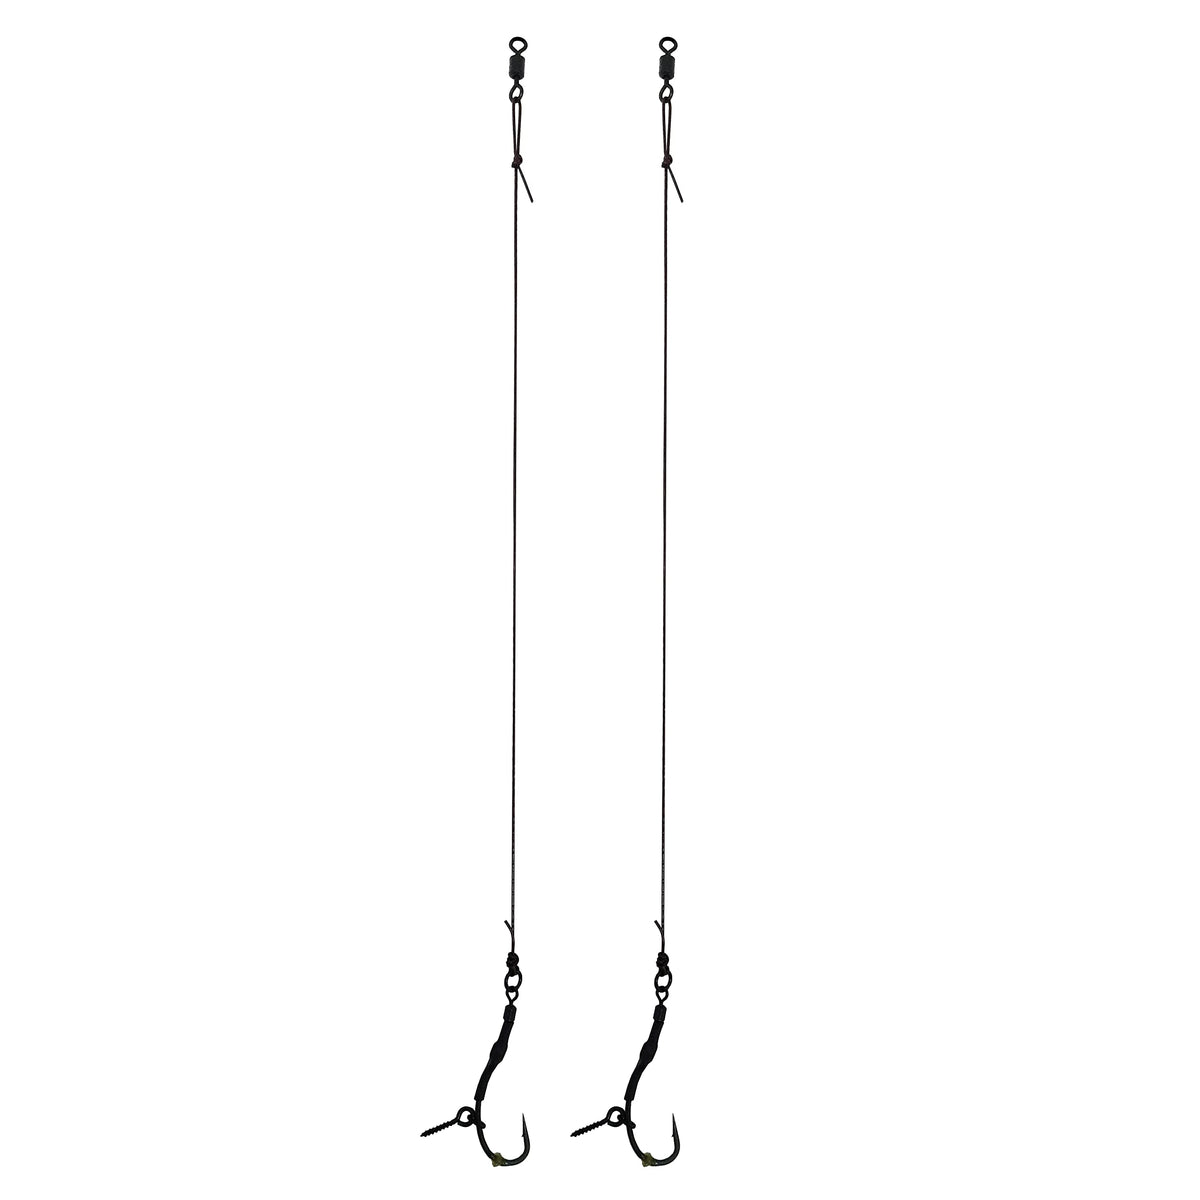 Carp On - 2 x SPINNER READY RIGS Size 8 - Carbon Hooks / 25lb Braid/Swivel & Flexi Ring/Bait Screw & Bell Cap Bead (Micro Barbed, 2 Rigs - Size 8 Hook) [37-3906-8]